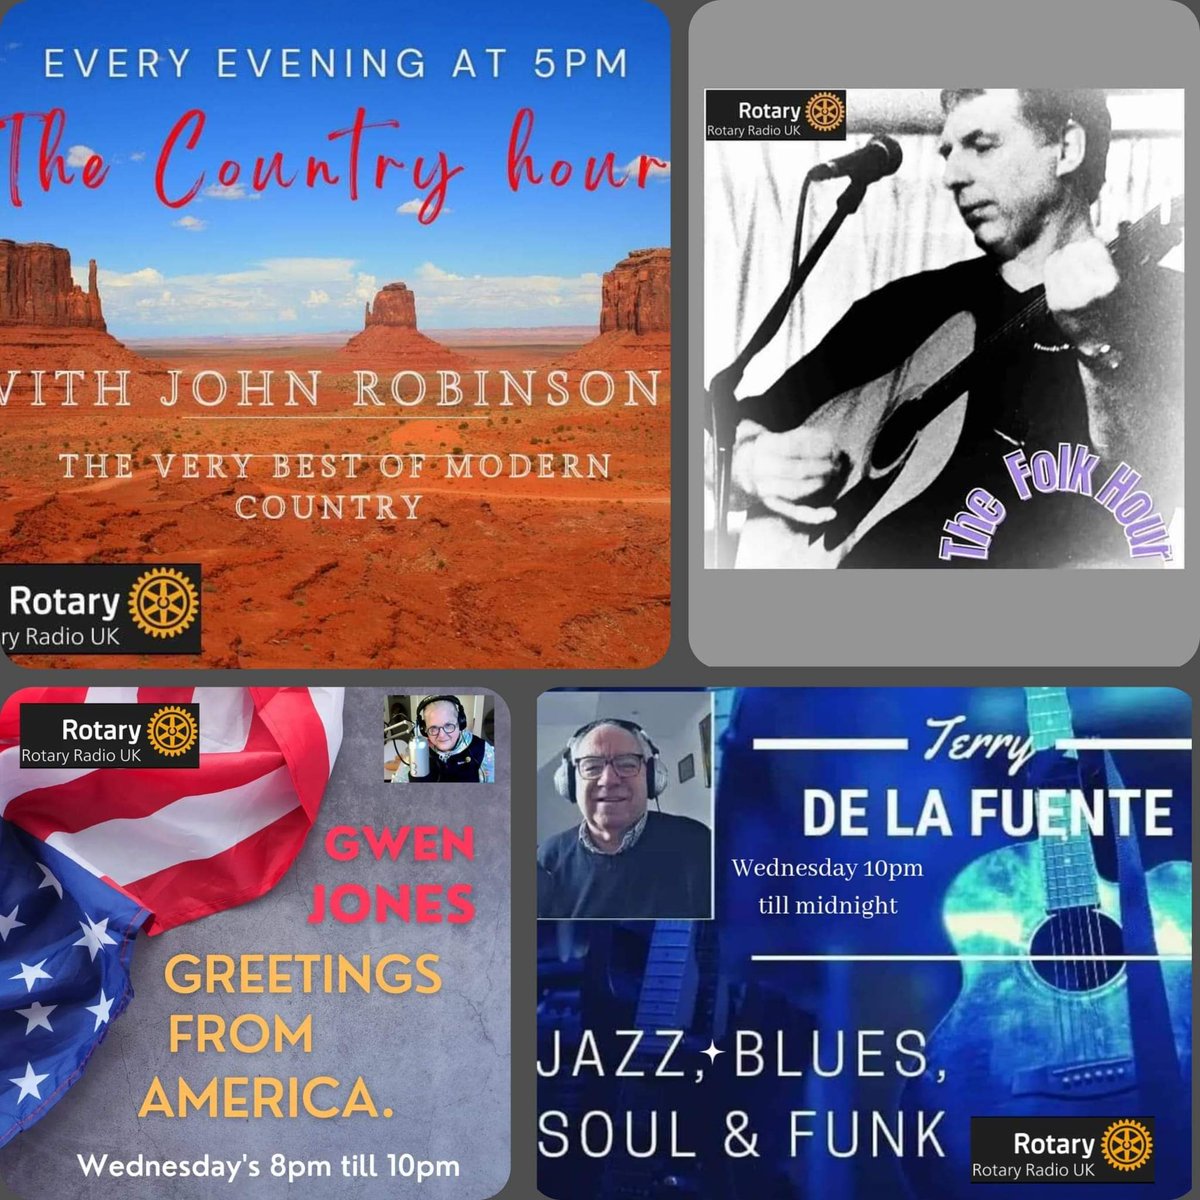 Great Entertainment for a Wednesday Evening here on Rotary Radio UK Modern Country at 5pm. Sixties at 6pm. Russ Hughes at 7pm. Gwen Jones 8pm. Terry De La Fuente at 10pm with more #Jazz,#Blues #Soul and #Funk. rotaryradiouk.org 'Alexa Play Rotary Radio UK'